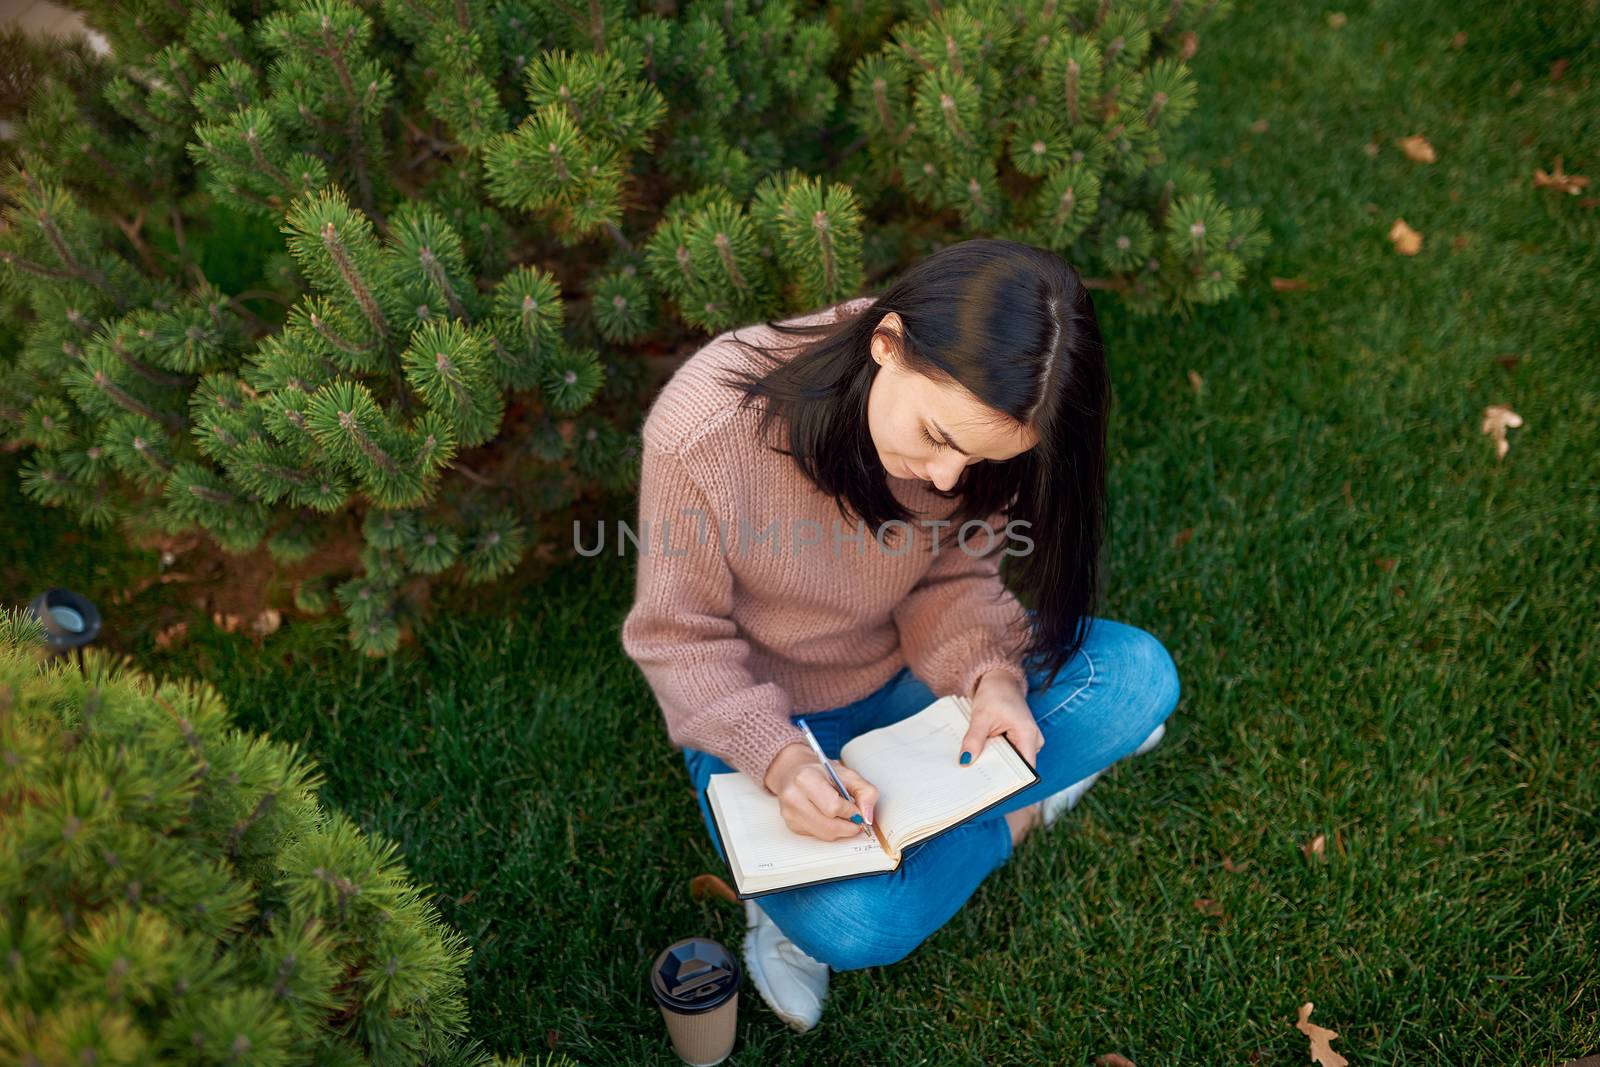 Top view of serious young female making some recordings in a thick copybook while sitting on a green grass lawn surrounded by conifers